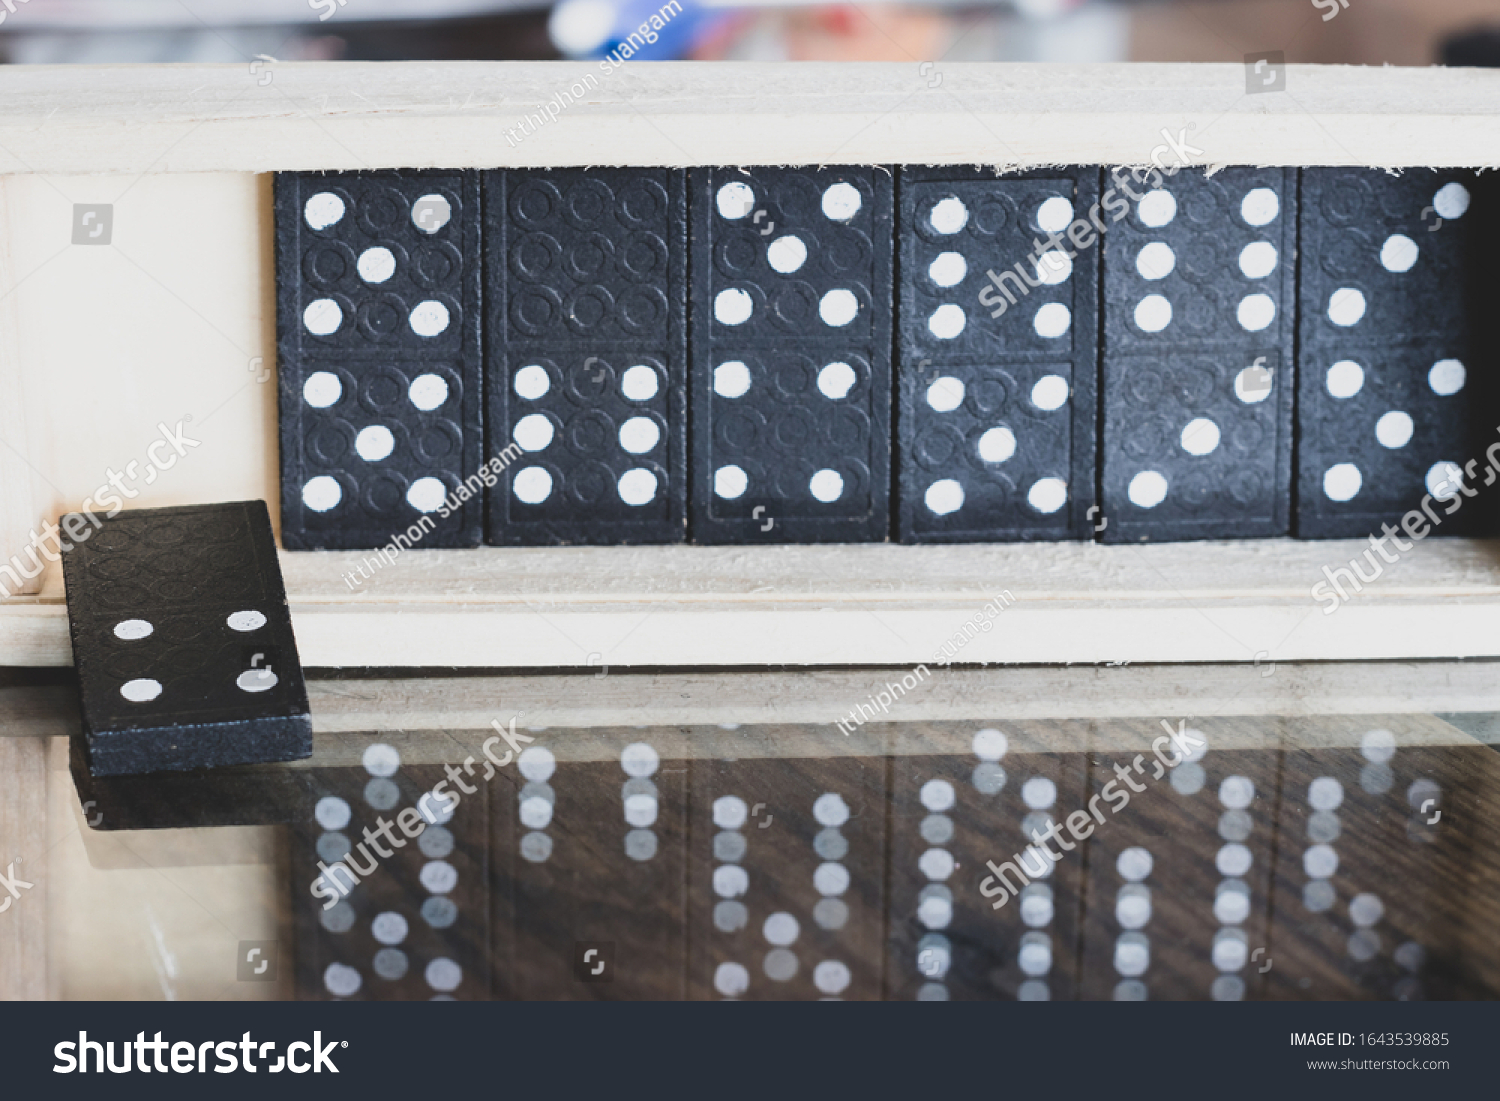 The black Domino Game, made of wood, is placed on a glass-covered wooden table on top. #1643539885